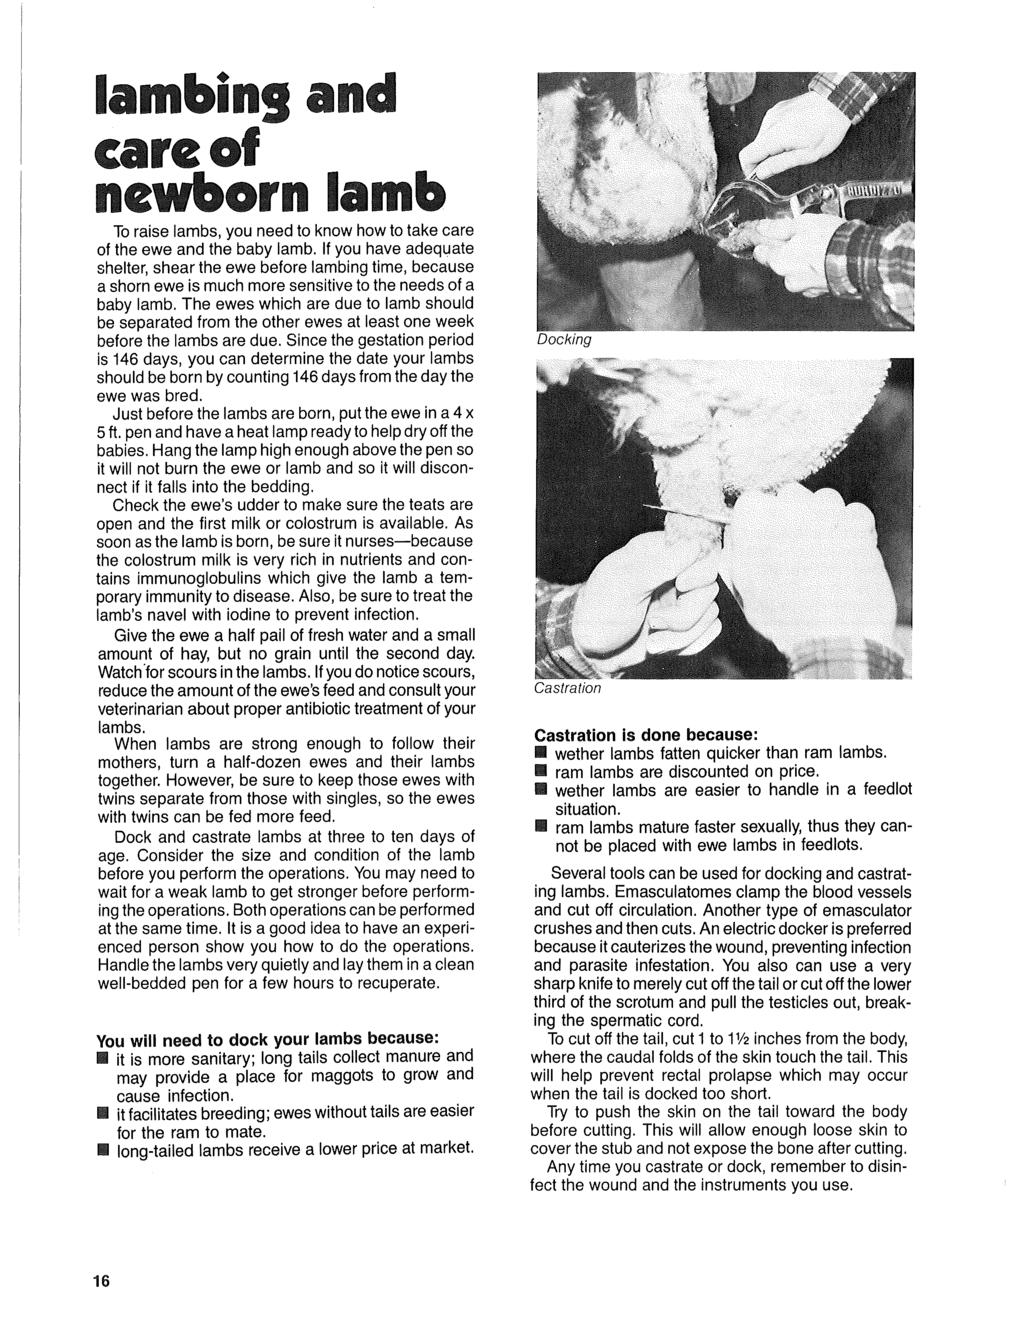 lnq an If rn Ia To raise lambs, you need to know how to take care Ia of the ewe and the baby lamb.